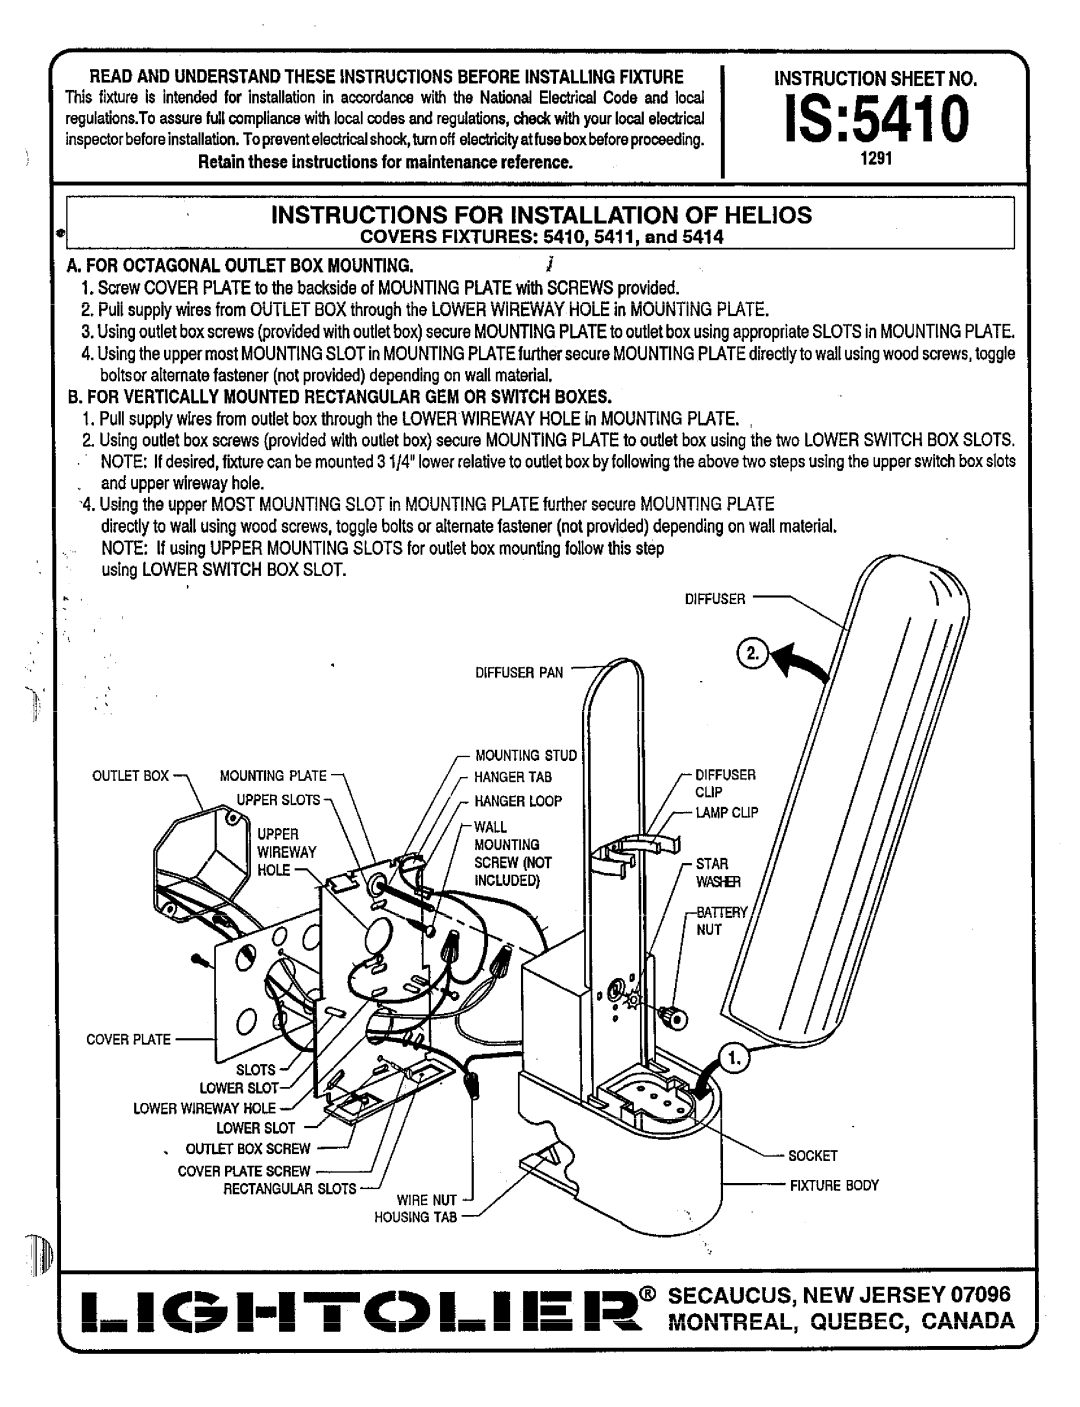 Lightolier 5410, 5414, 5411 instruction sheet Is, Instructions For Installation Of Helios 